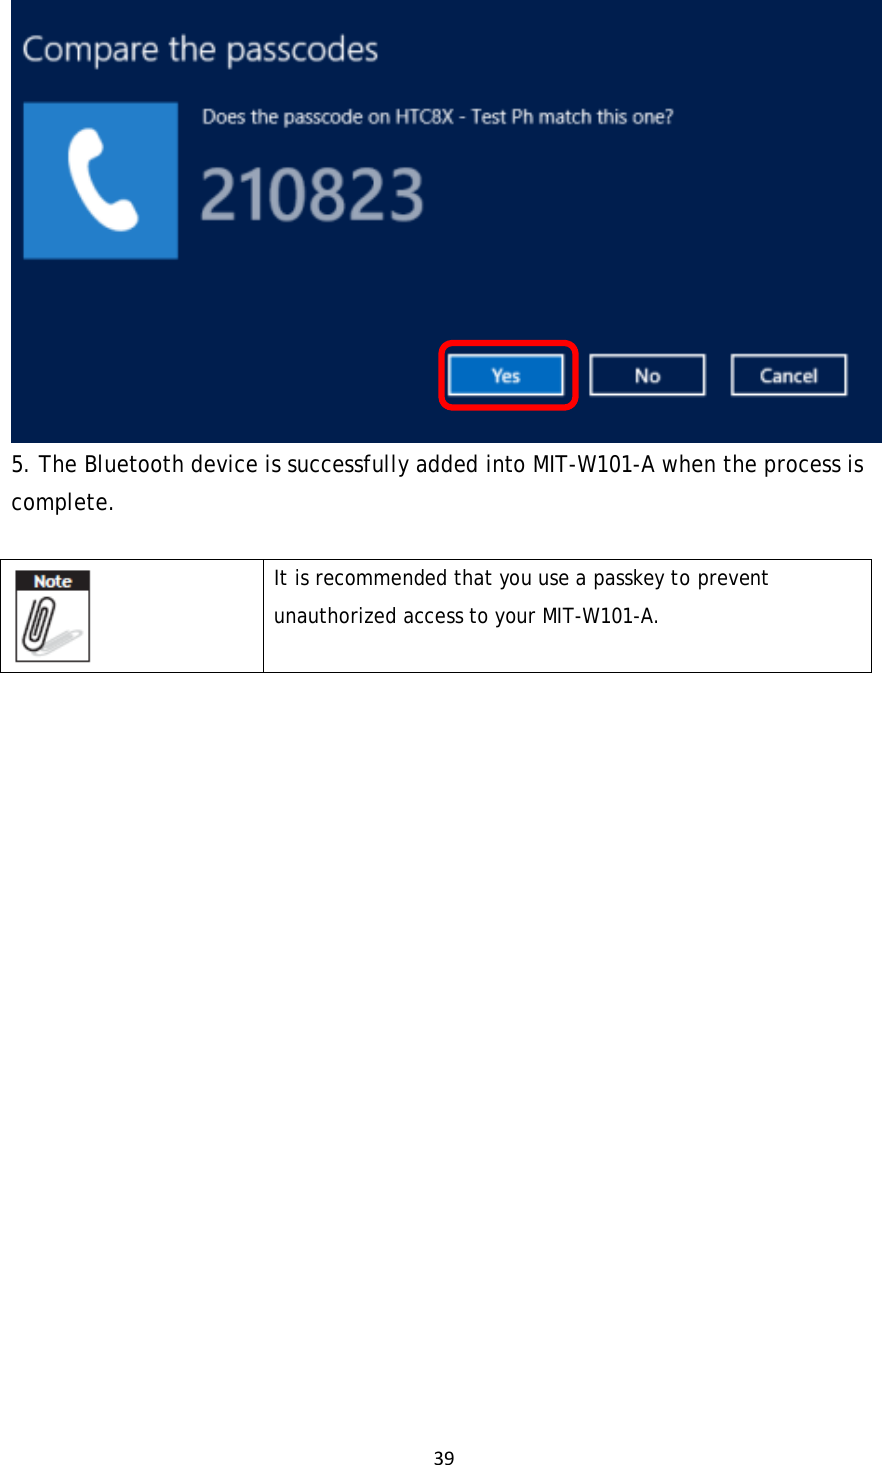 39 5. The Bluetooth device is successfully added into MIT-W101-A when the process is complete.   It is recommended that you use a passkey to prevent unauthorized access to your MIT-W101-A.           